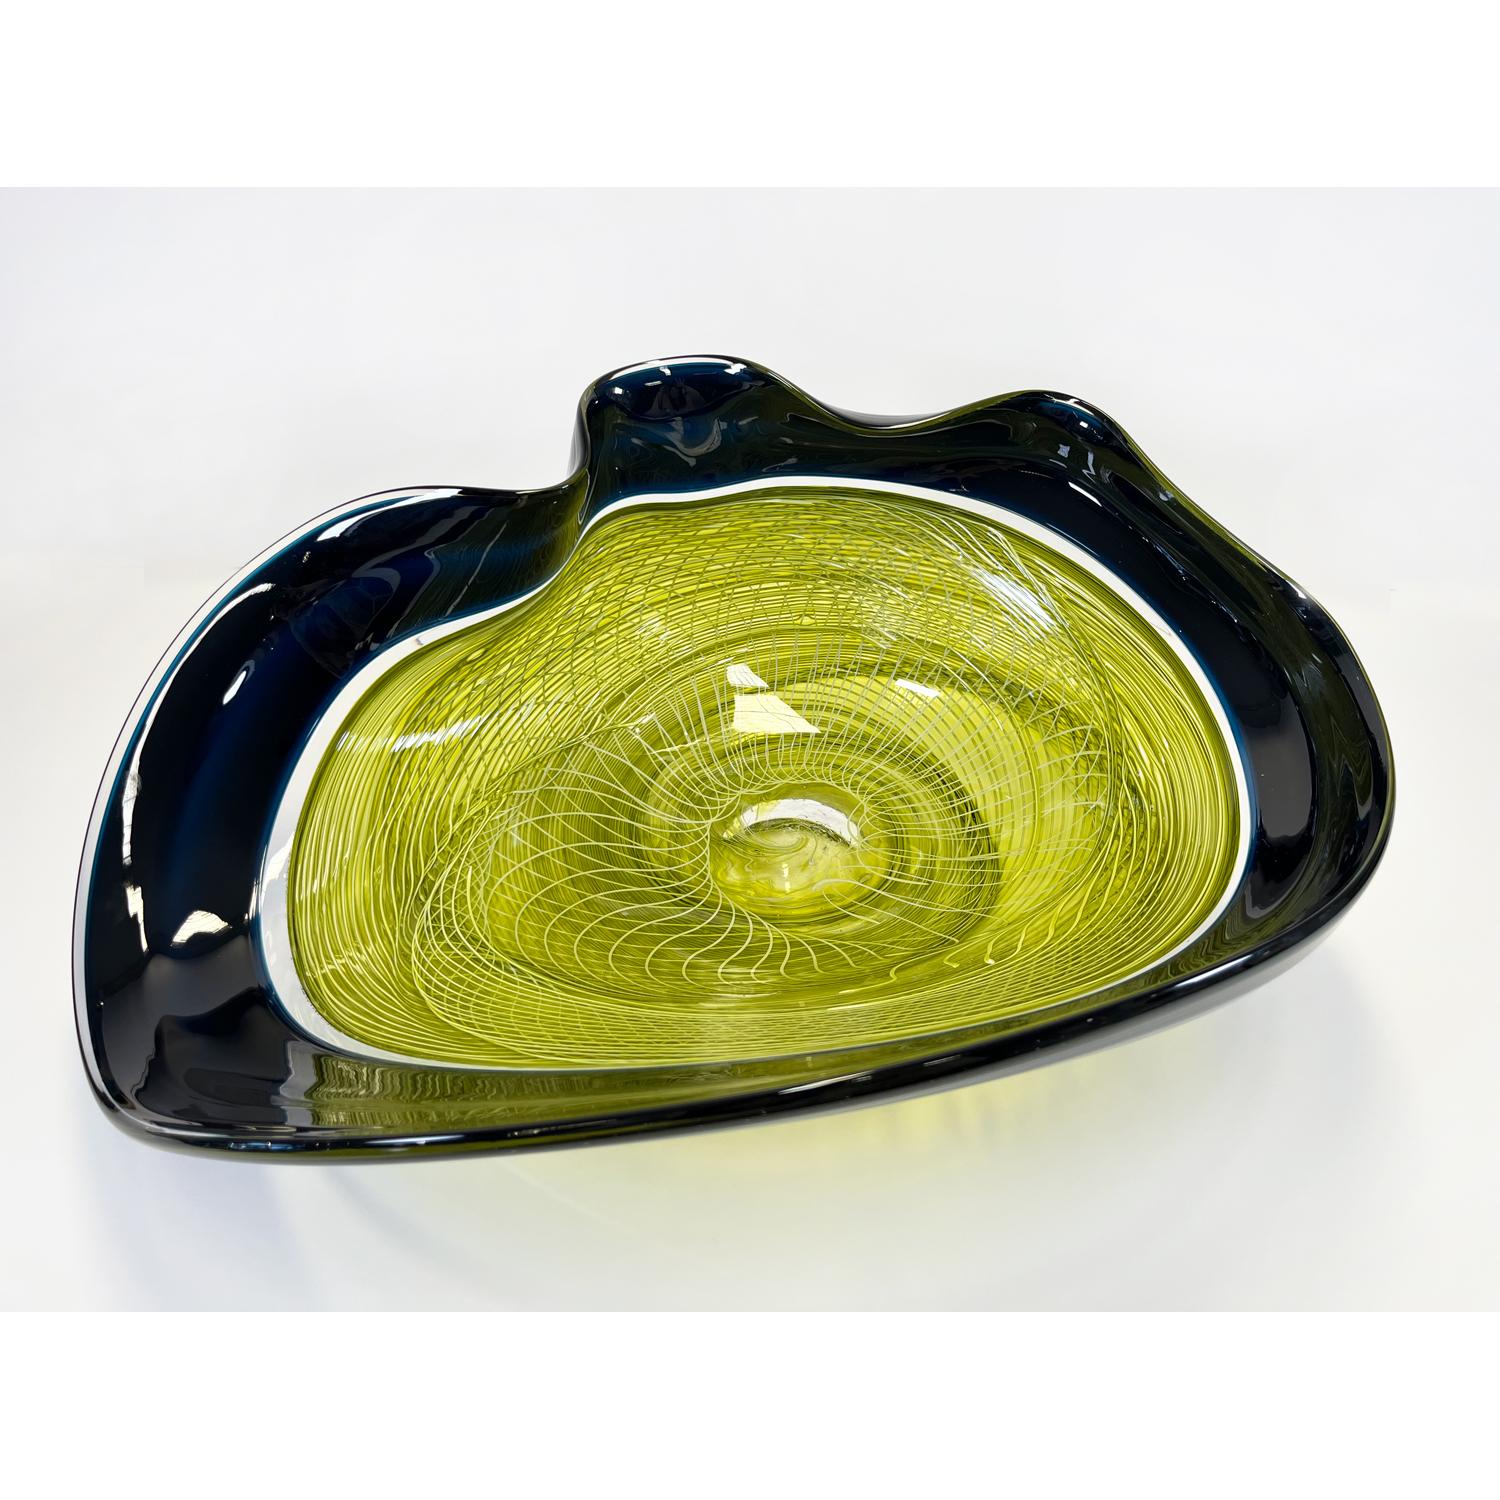 This Seagreen/Olive Rondelle Bowl is a continuation of David's work with cane. Fusing his signature wave bowl motif with his newer rondelle cane pattern. This beautiful glass bowl is sure to be a showstopper in your space. 

David Thai is a Chinese